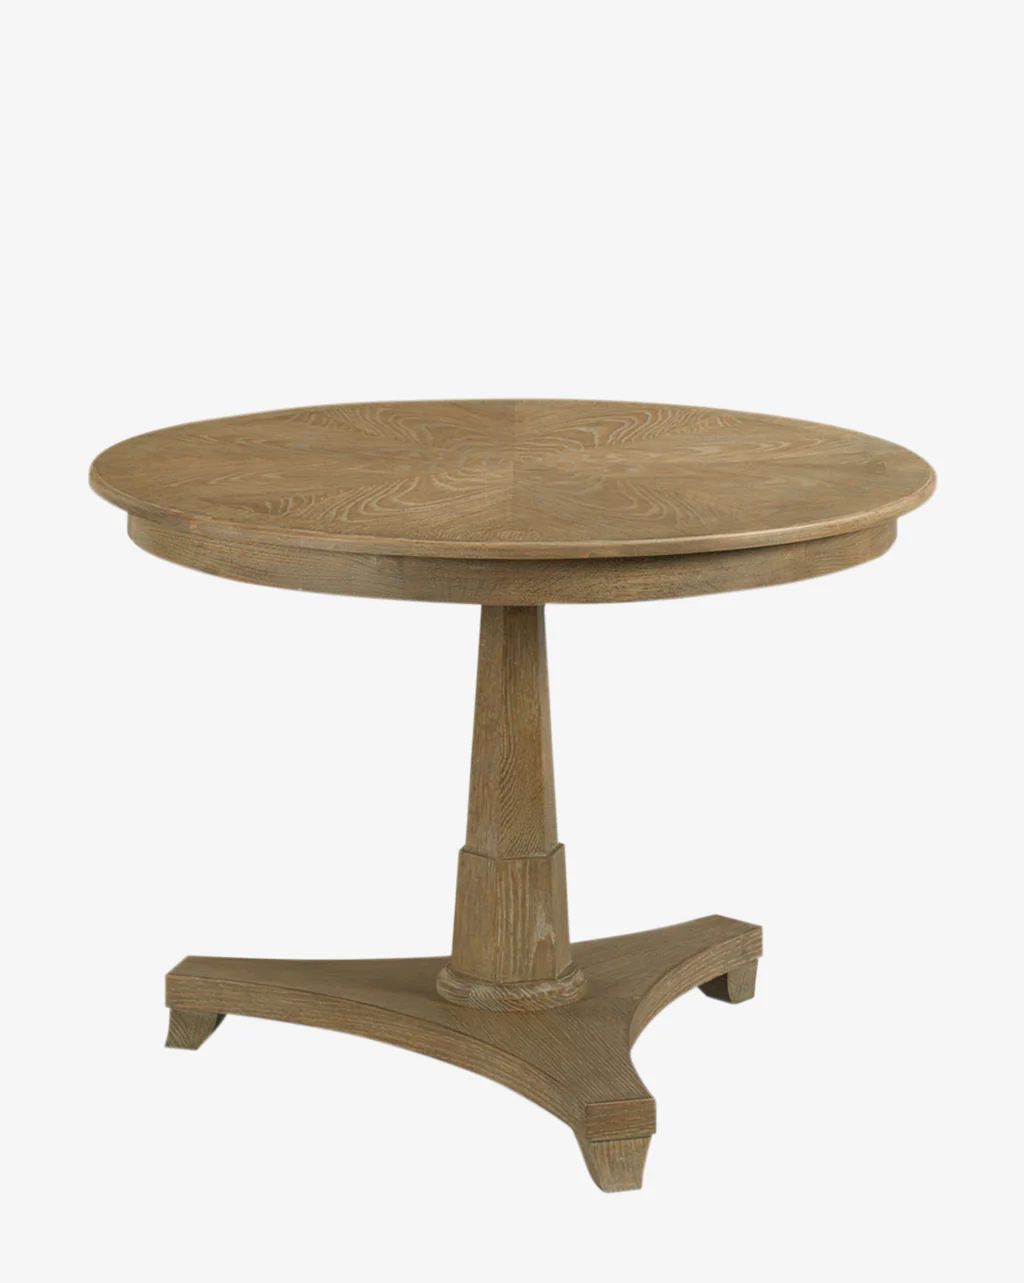 Marna Entry Table | McGee & Co.